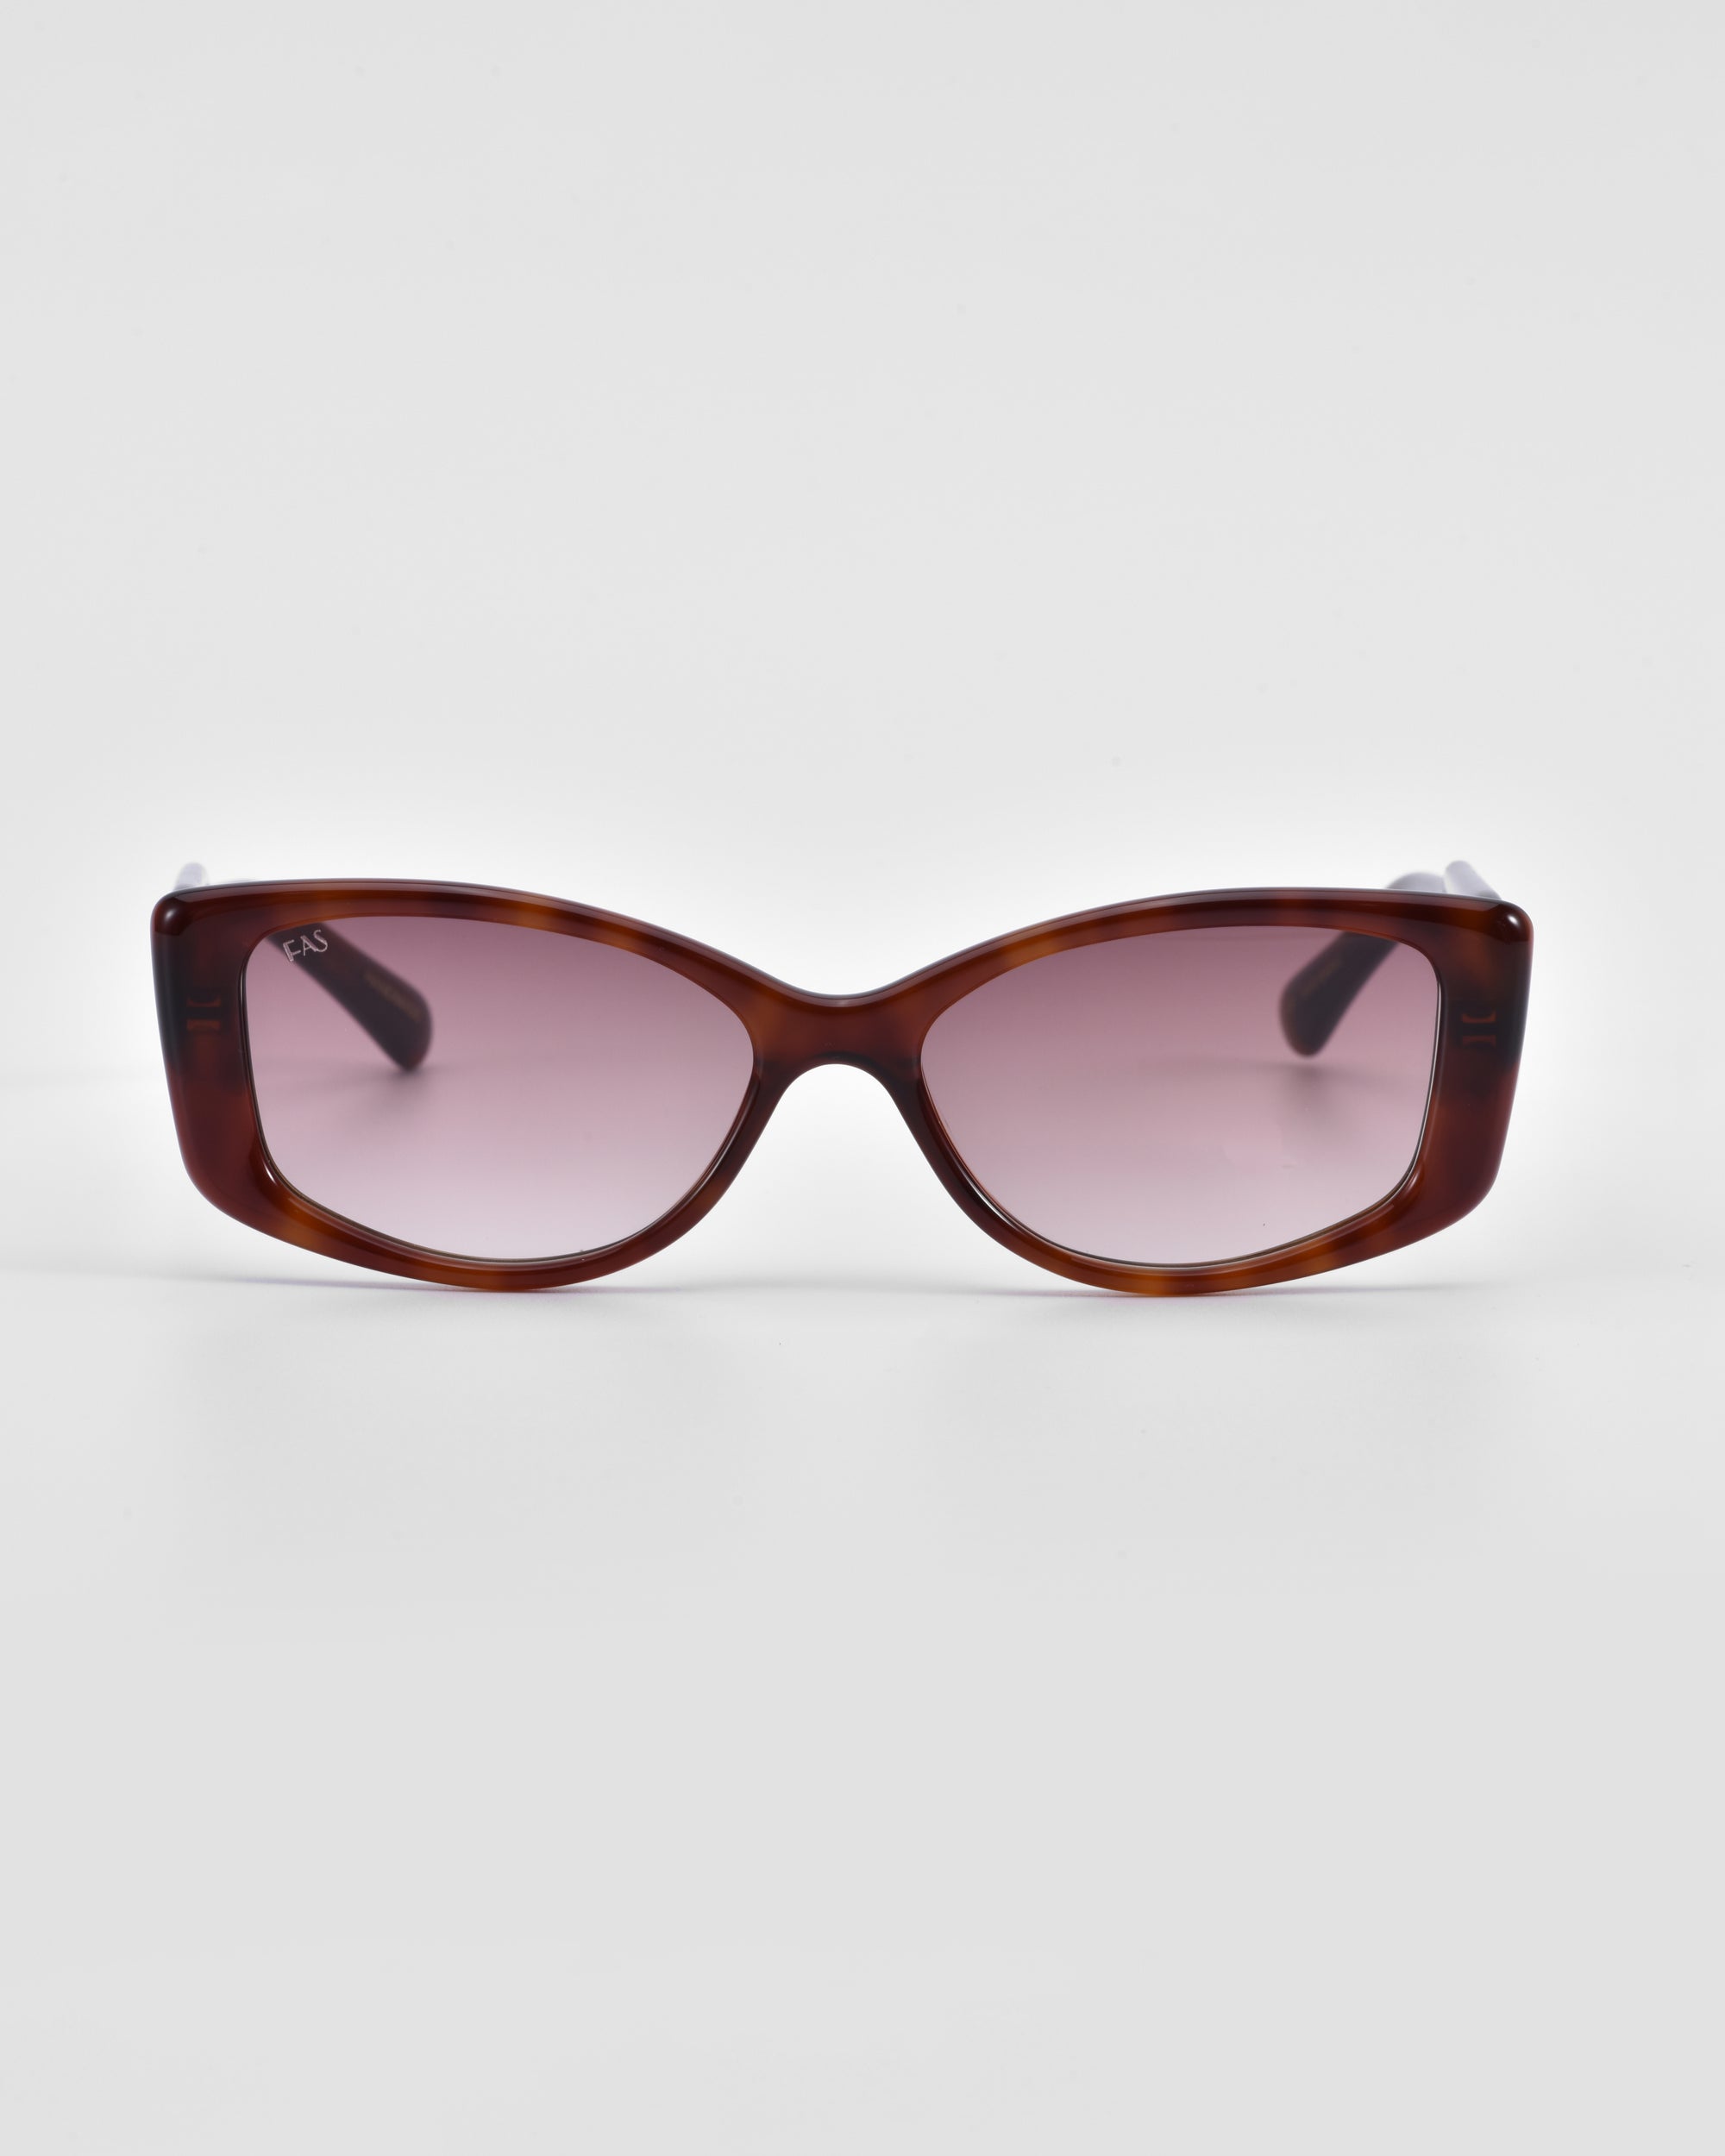 A pair of Mene sunglasses by For Art&#39;s Sake® with a brown, glossy frame and rectangular lenses that have a subtle pinkish tint. The arms of the glasses are obscured but appear to match the frame in color. White background.